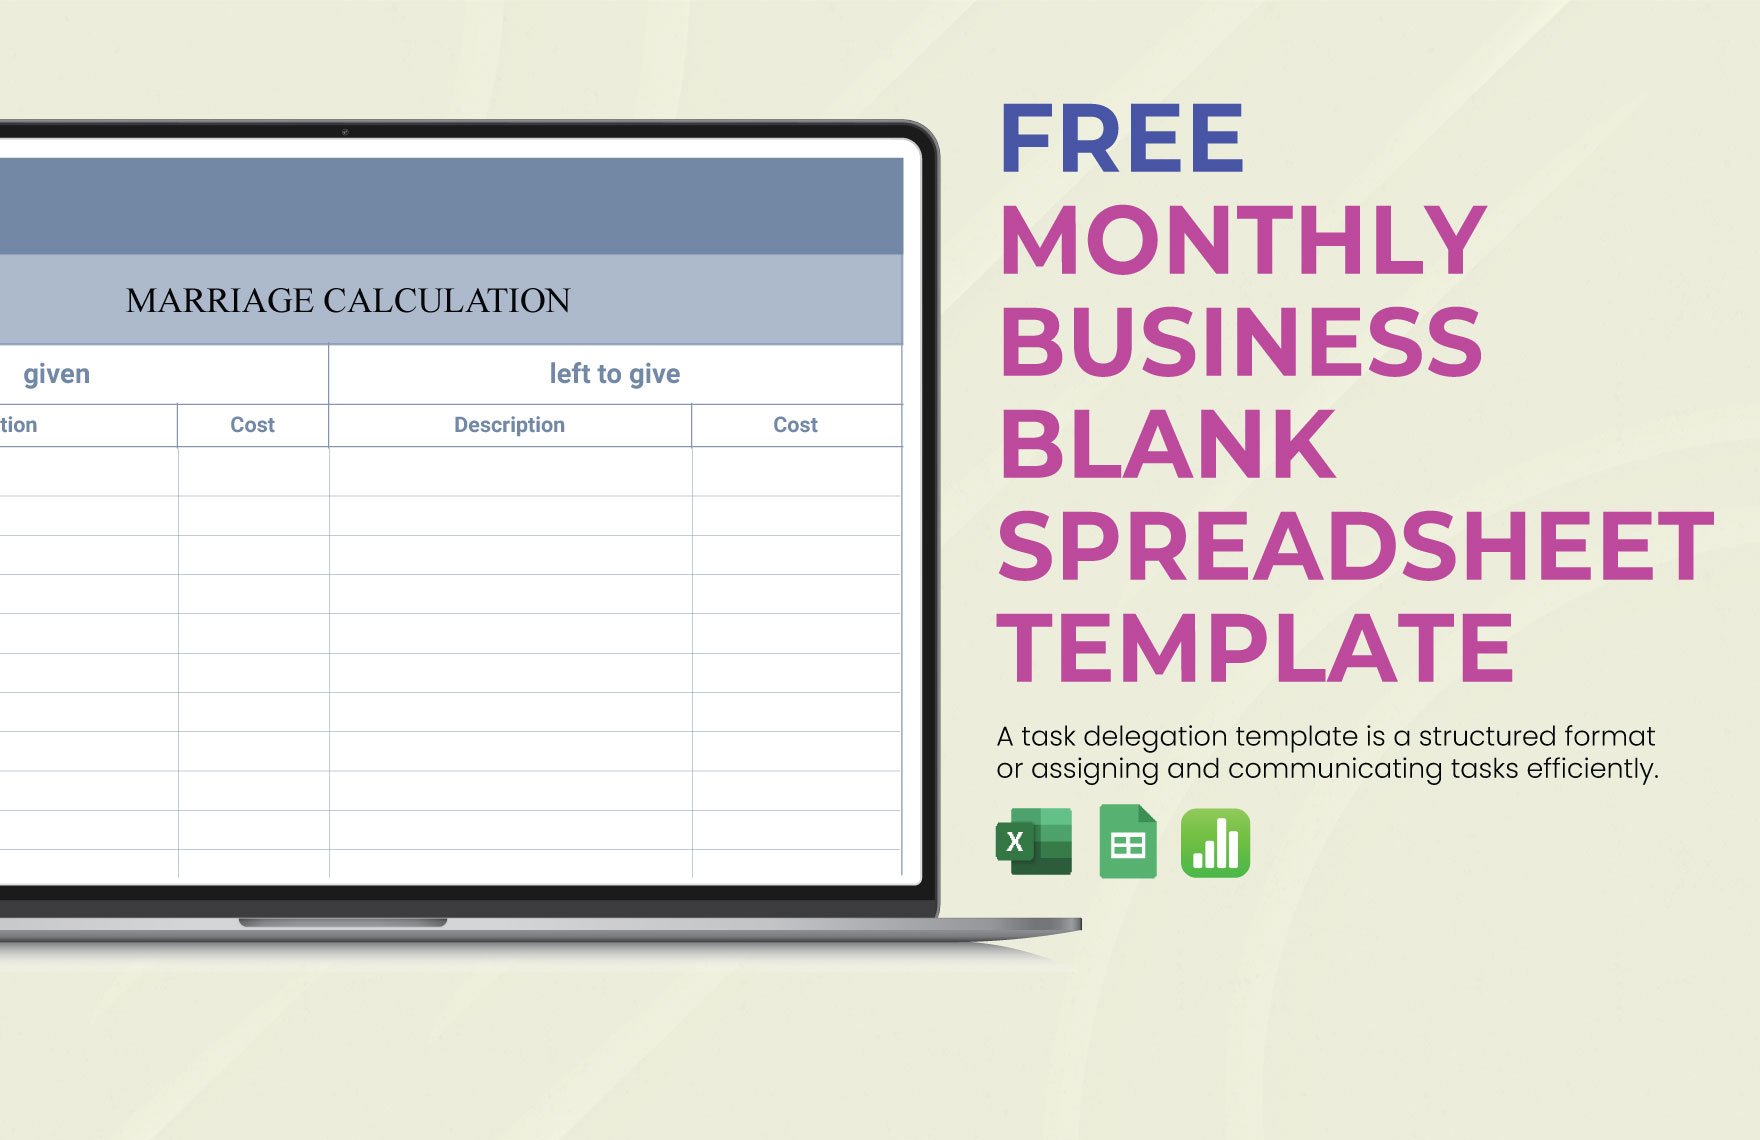 Monthly Business Blank Spreadsheet Template in Word, Google Docs, Excel, PDF, Google Sheets, Apple Pages, Apple Numbers